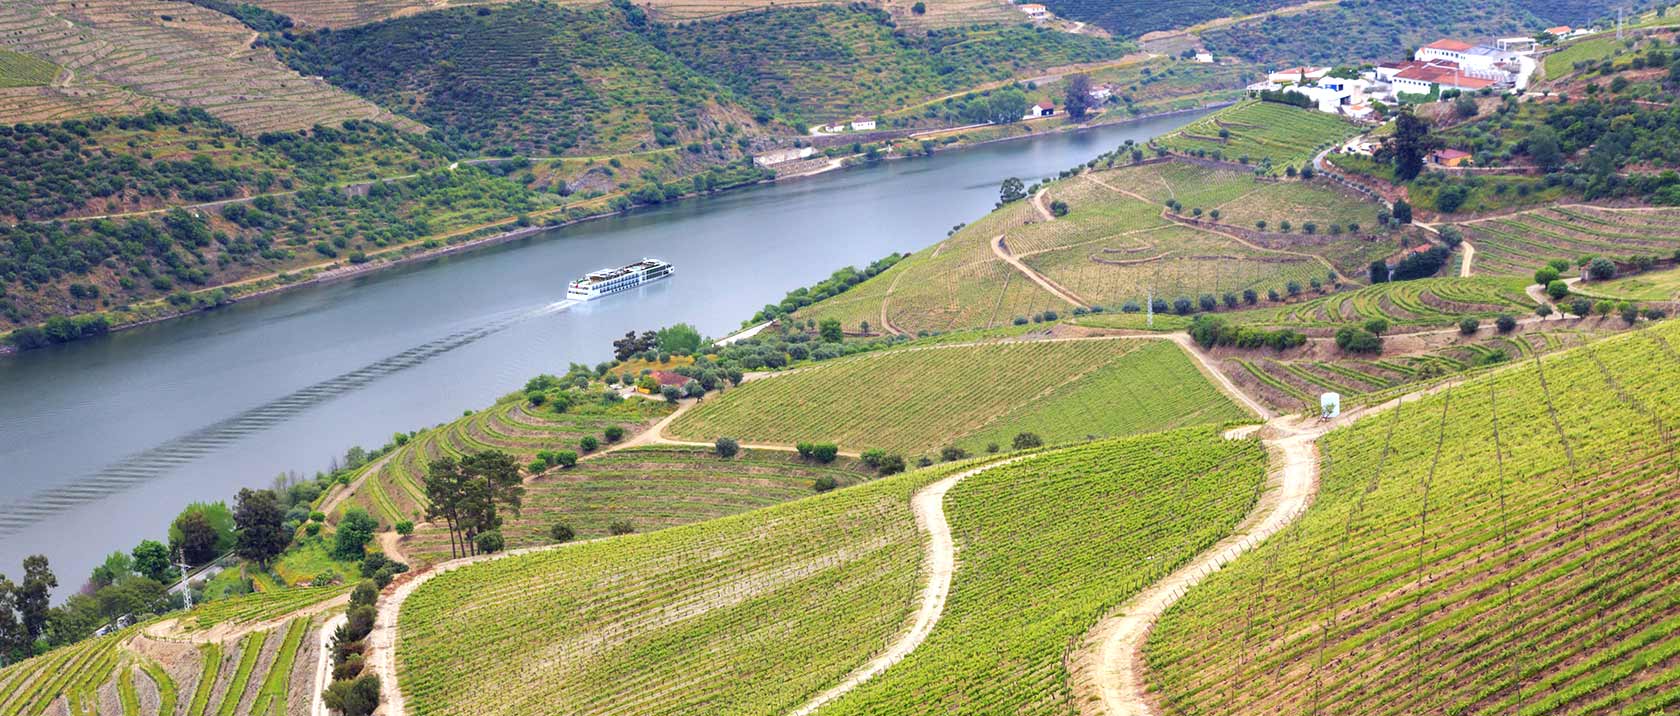 A Viking River Ship sailing down the Duoro as seen from a mountainside of green vineyards.